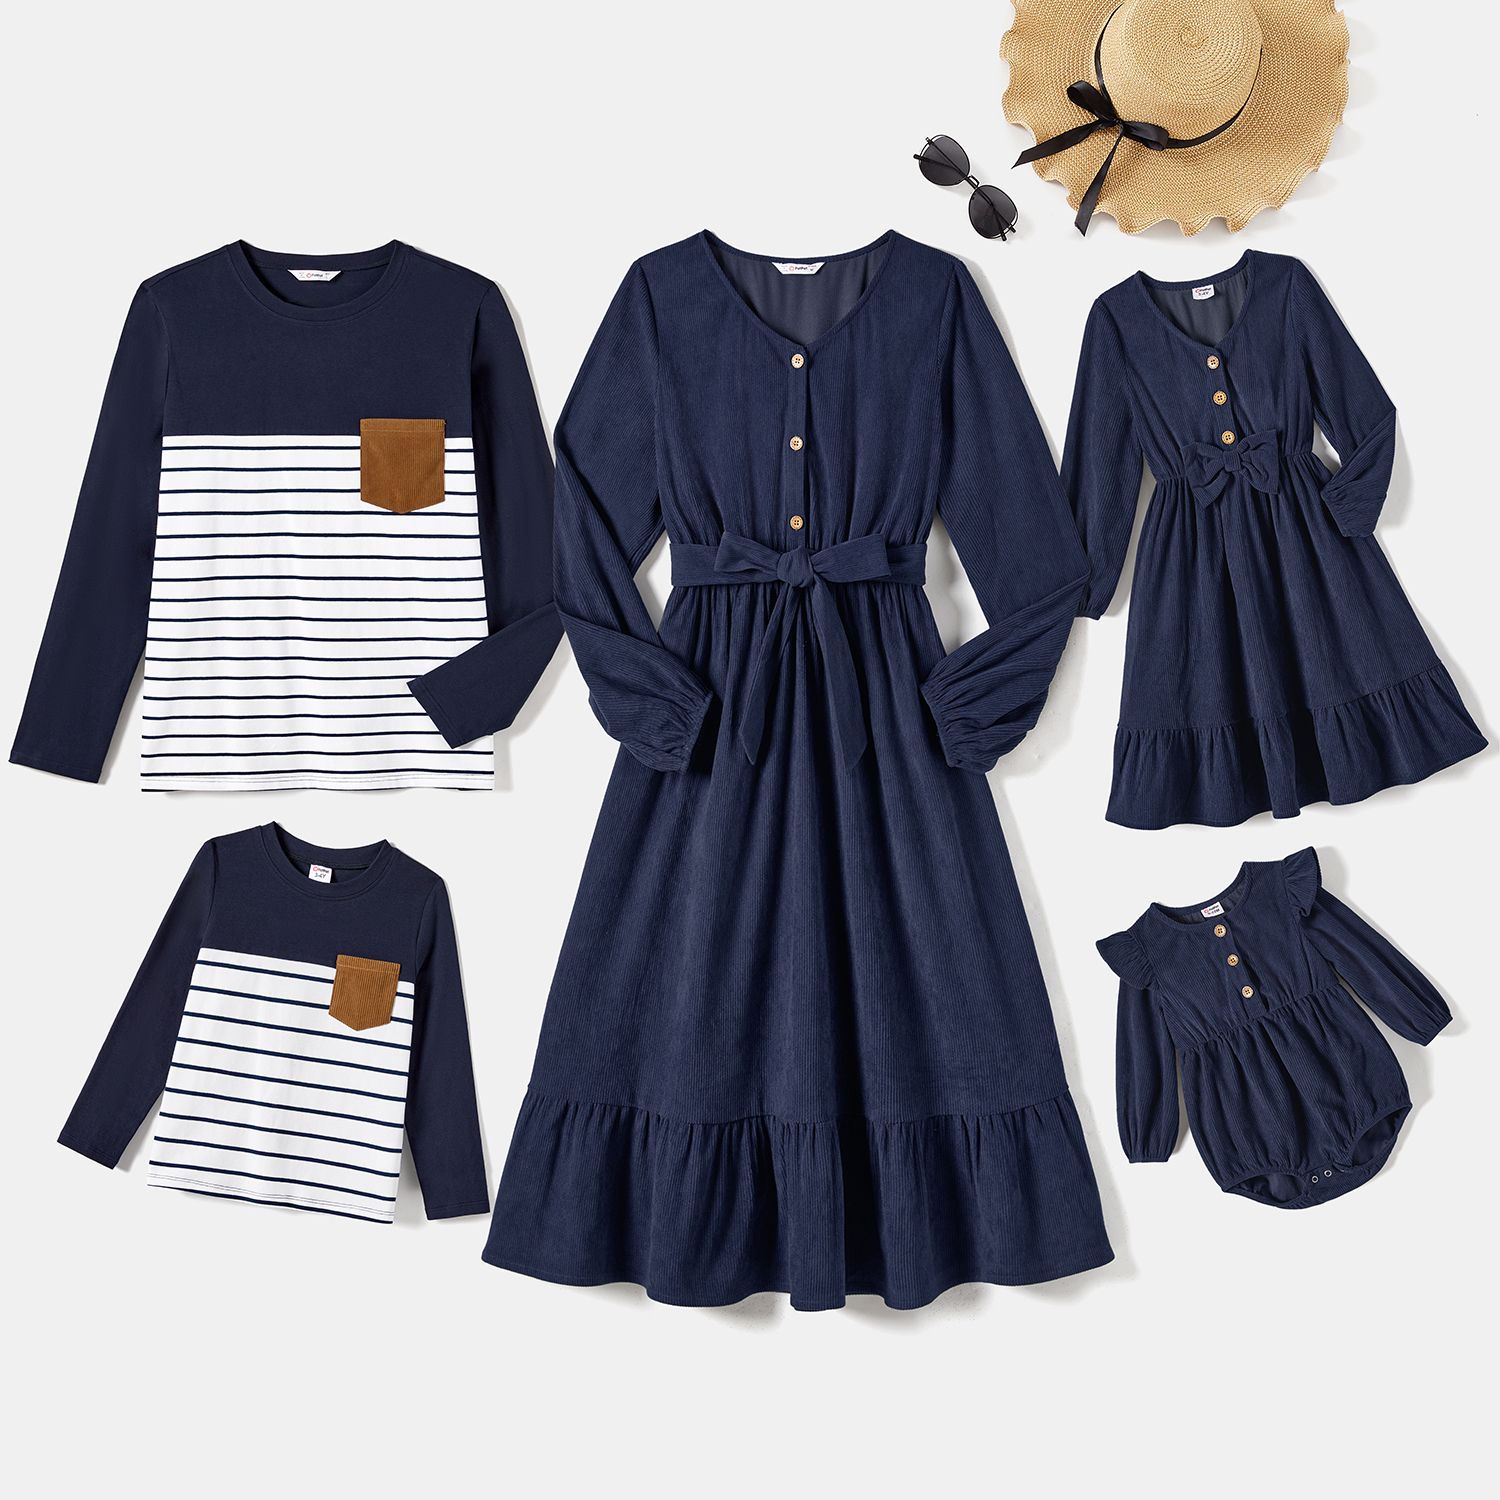 Family Matching Cotton Ribbed Long-sleeve Colorblock Dresses And Striped Tops Sets